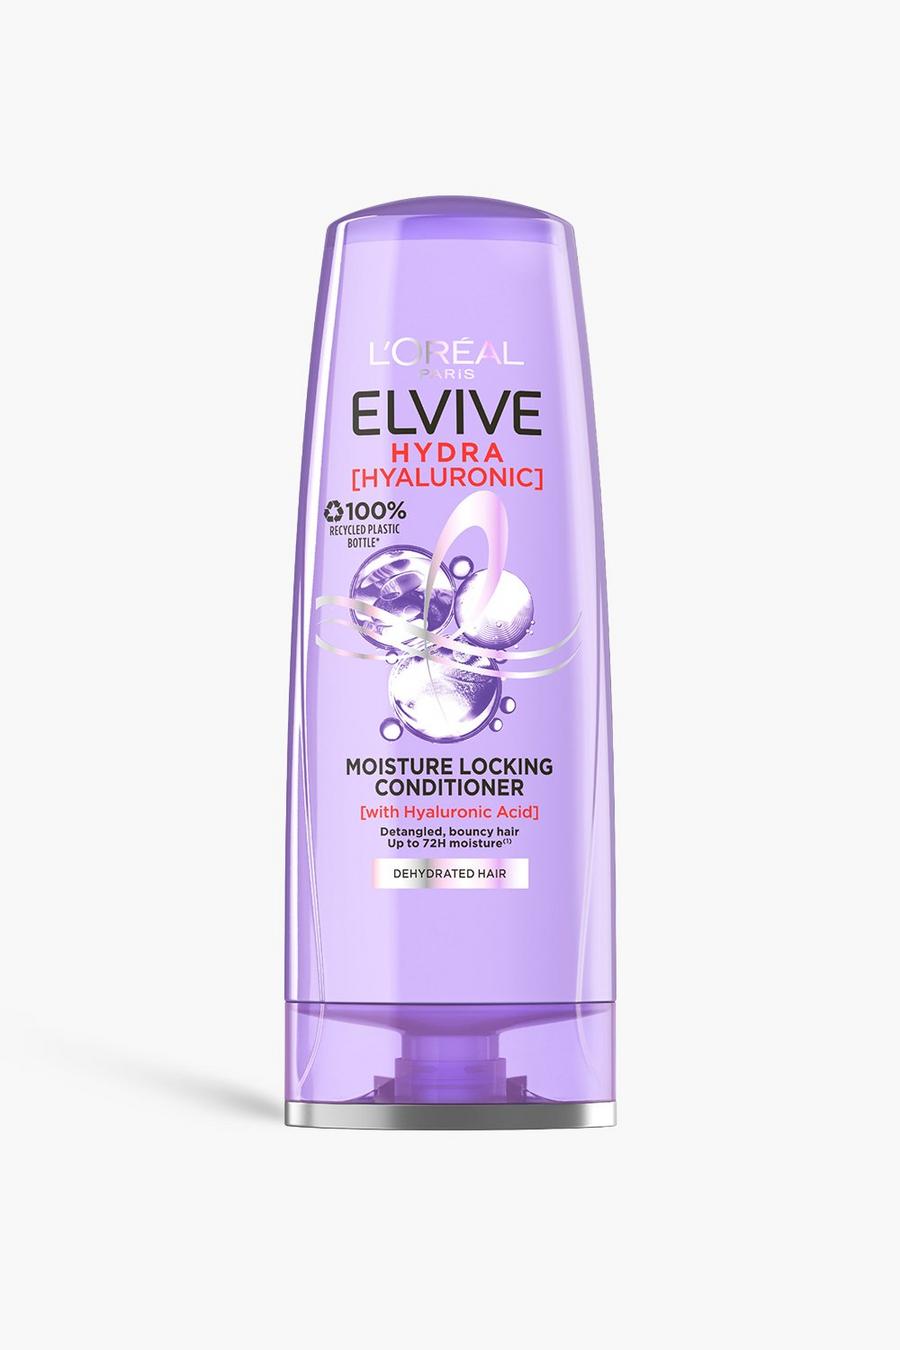 White L'Oreal Elvive Hydra Hyaluronic Acid Conditioner , moisturising for dehydrated hair